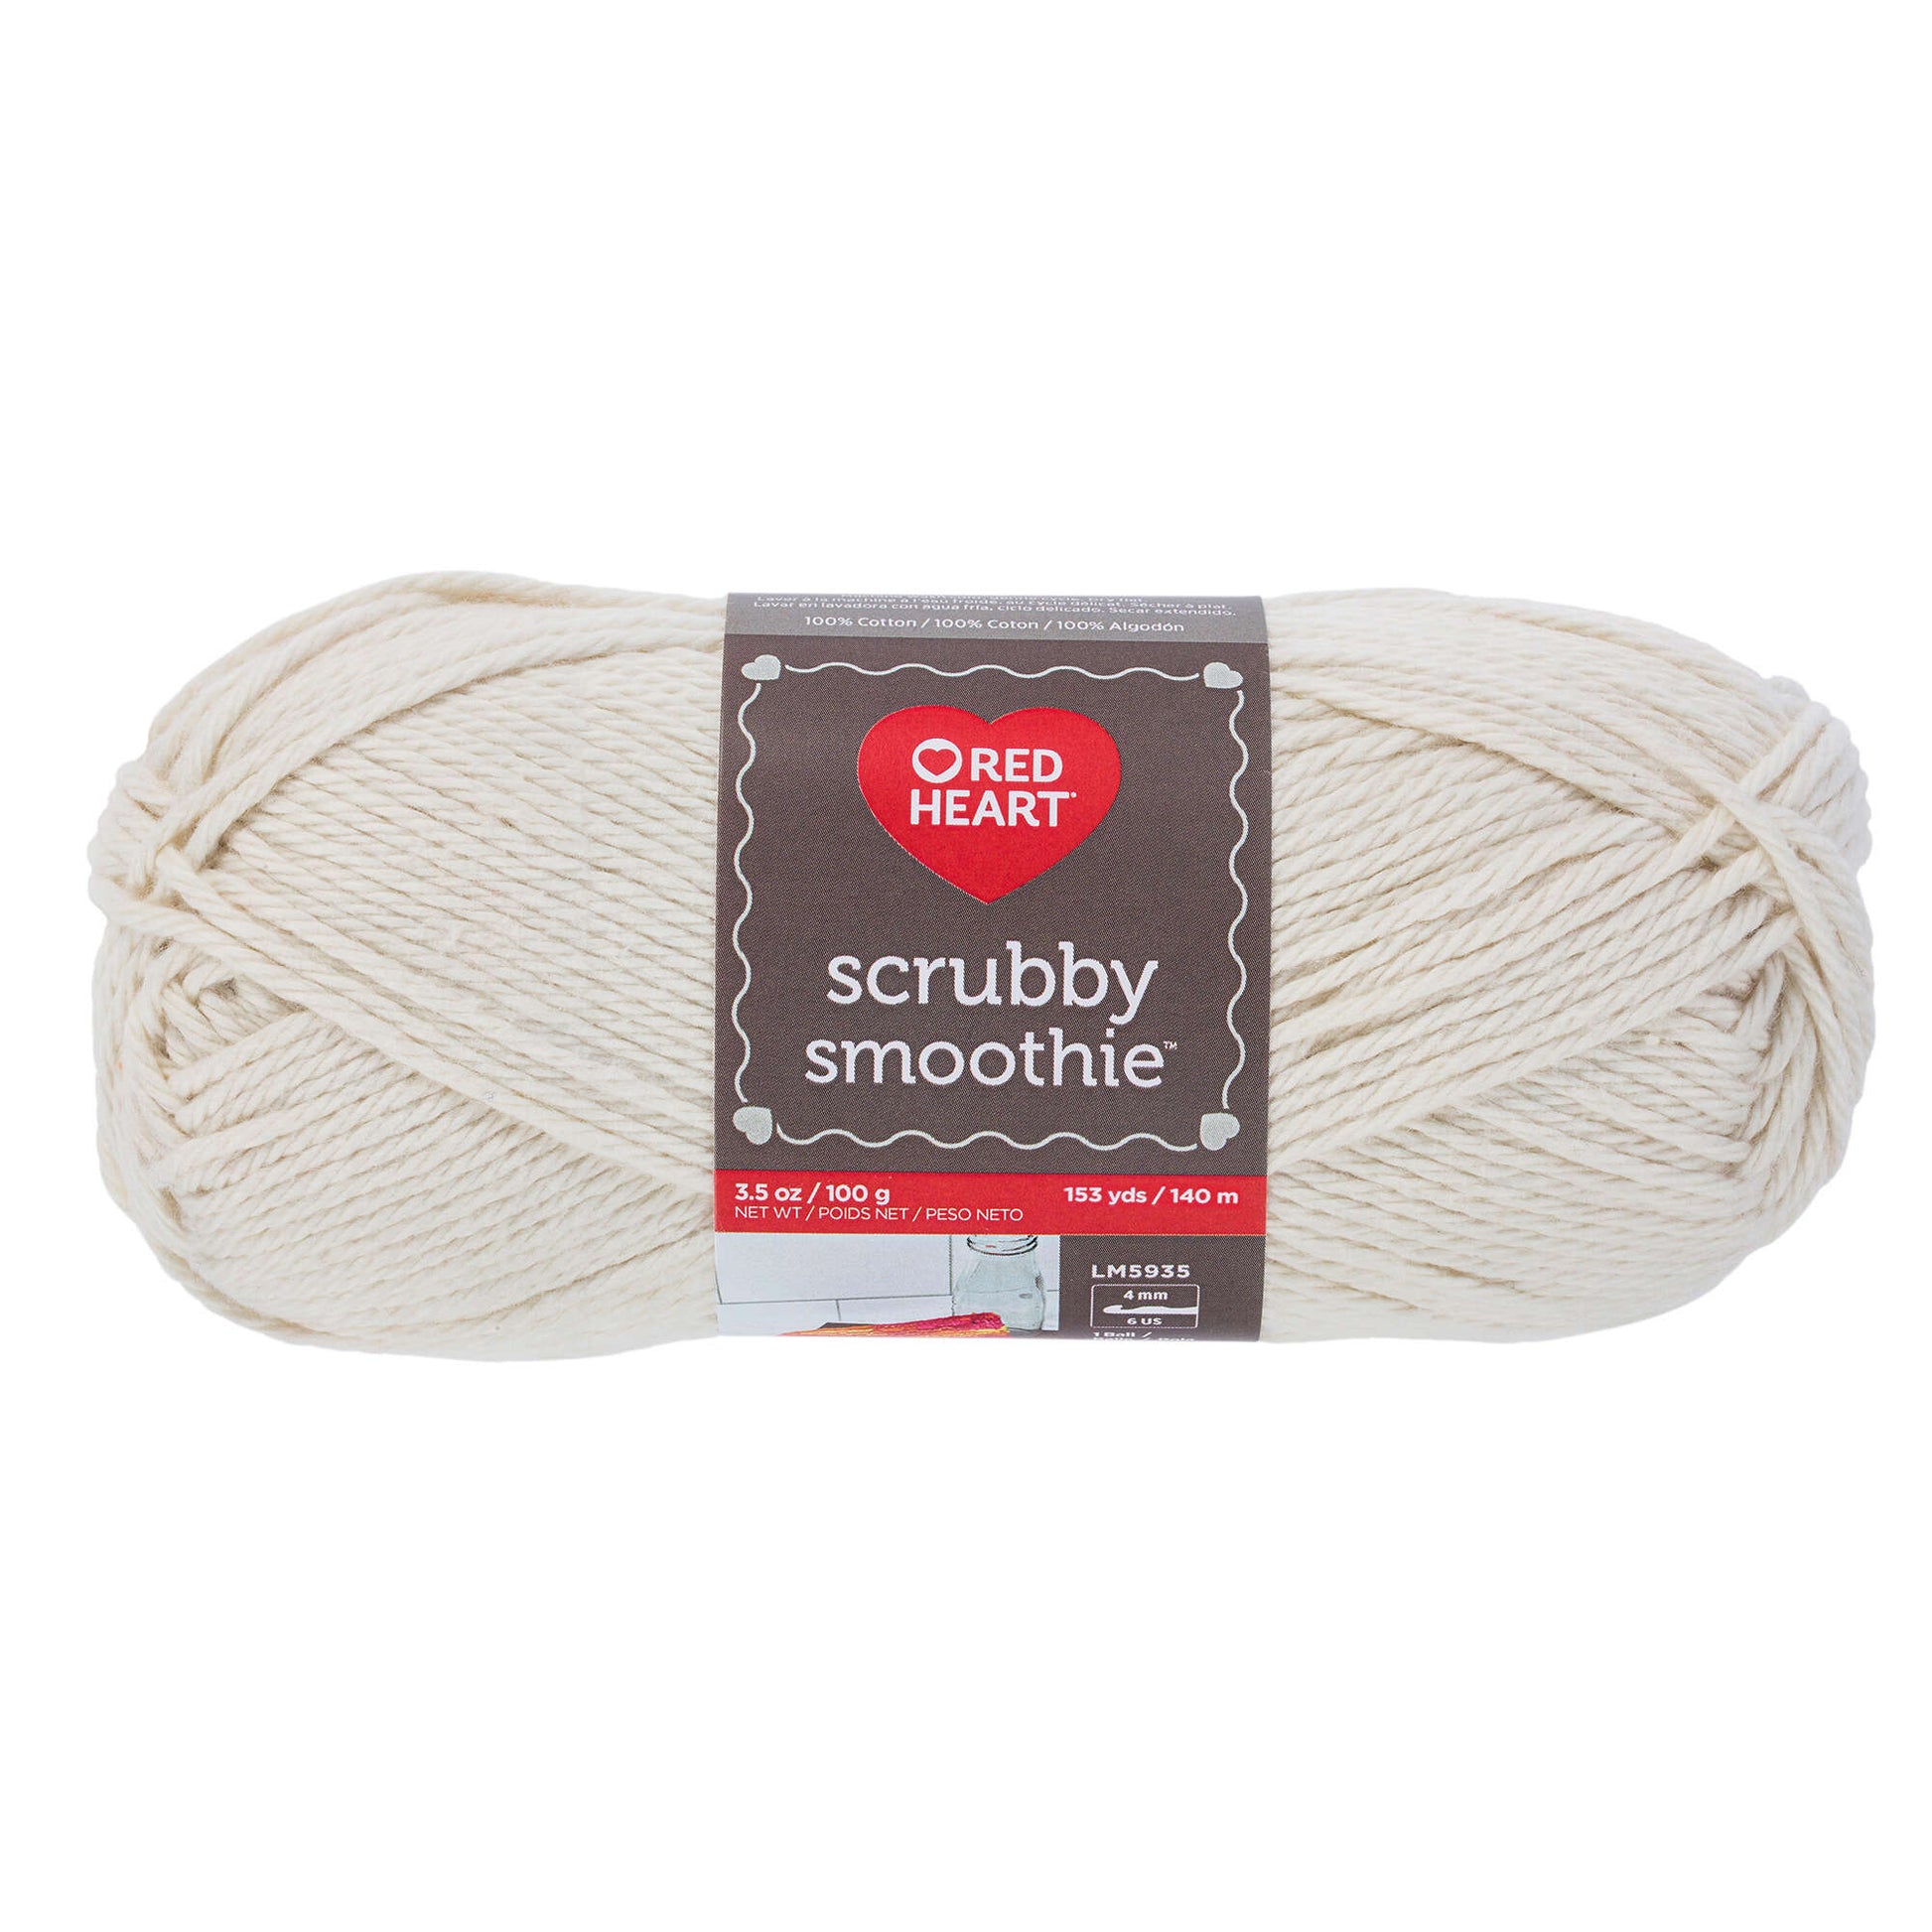 Red Heart Scrubby Smoothie Yarn - Discontinued shades